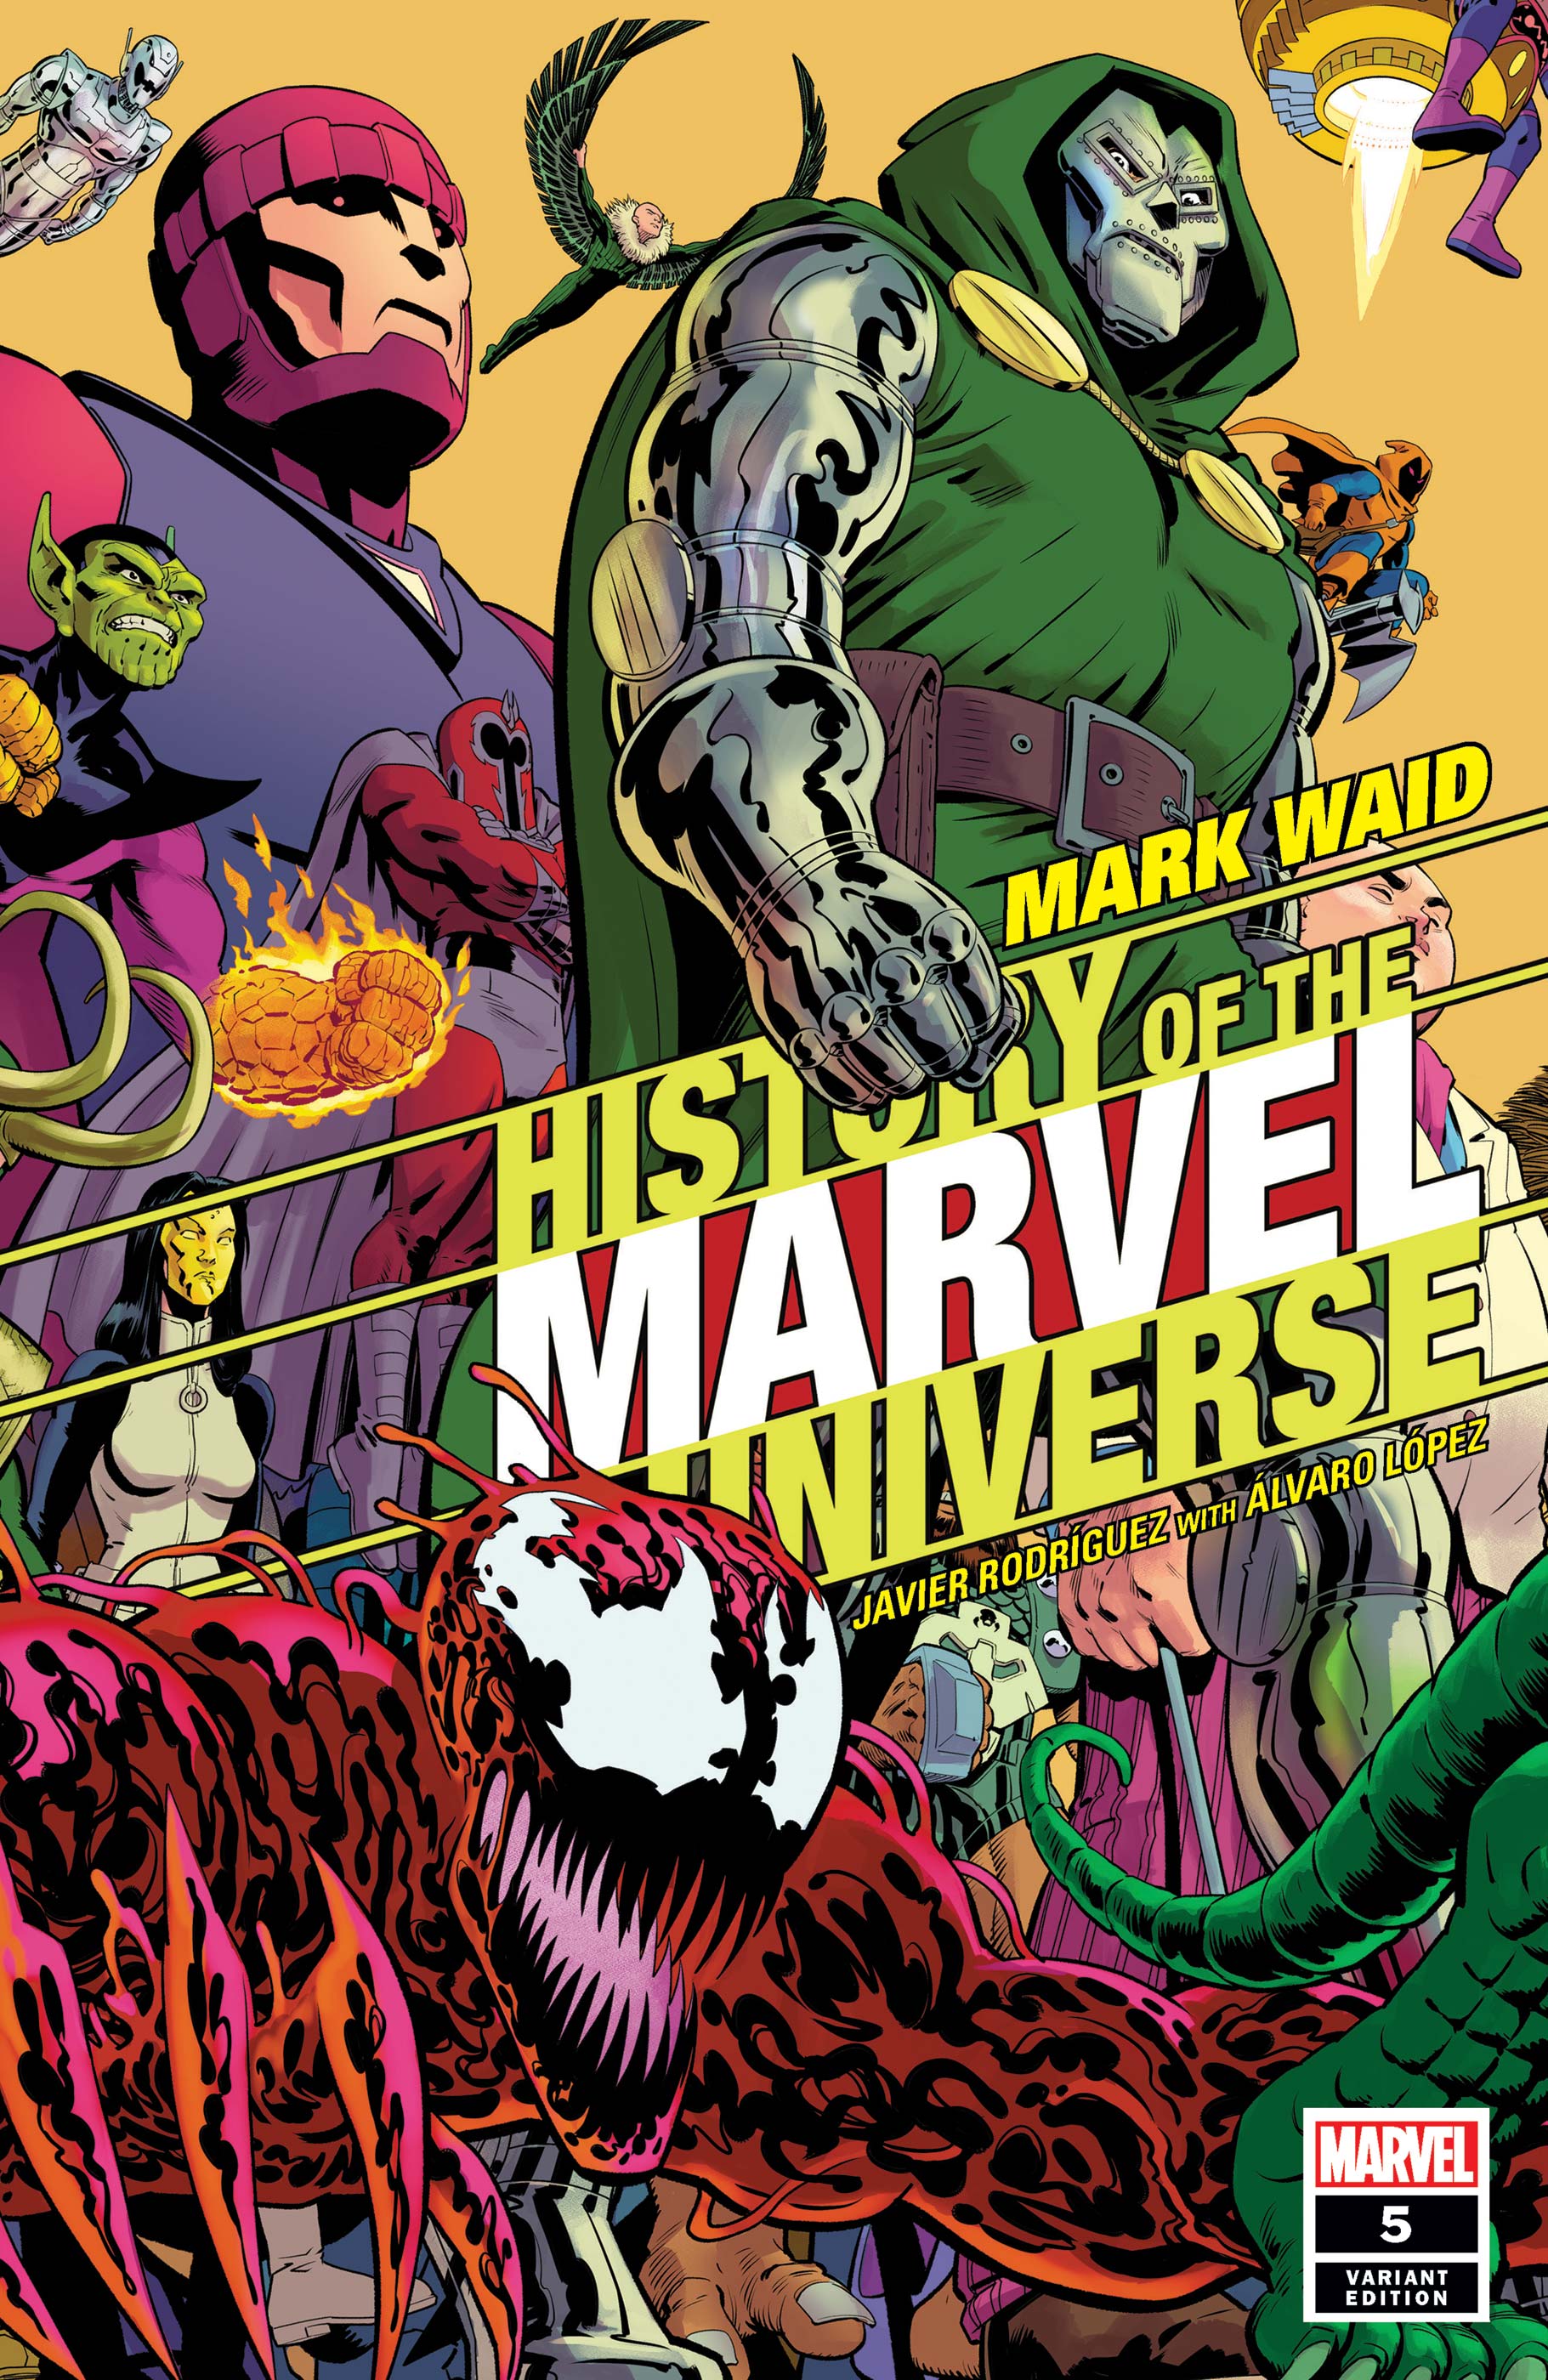 History of the Marvel Universe (2019) #5 (Variant)